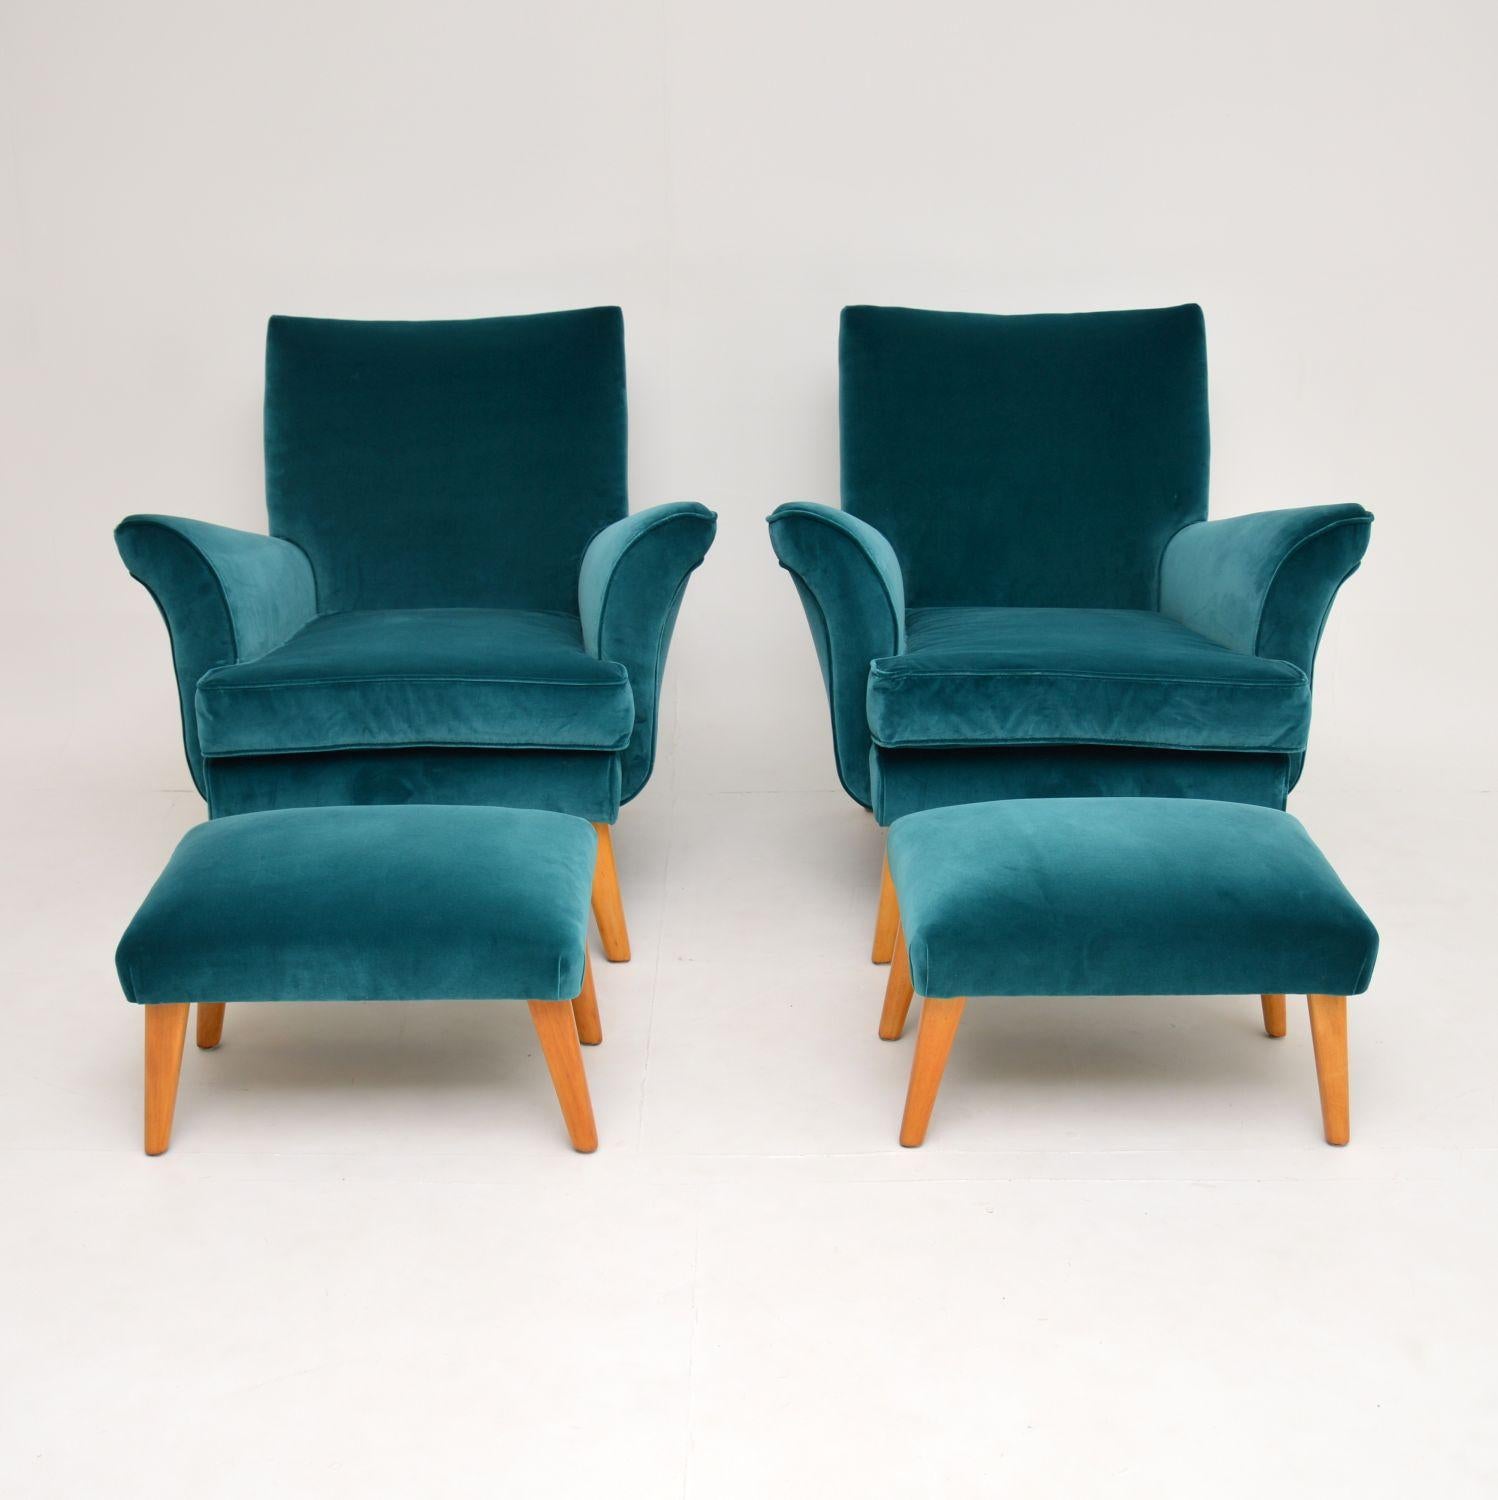 English Pair of Vintage Armchairs and Ottomans, circa 1960s